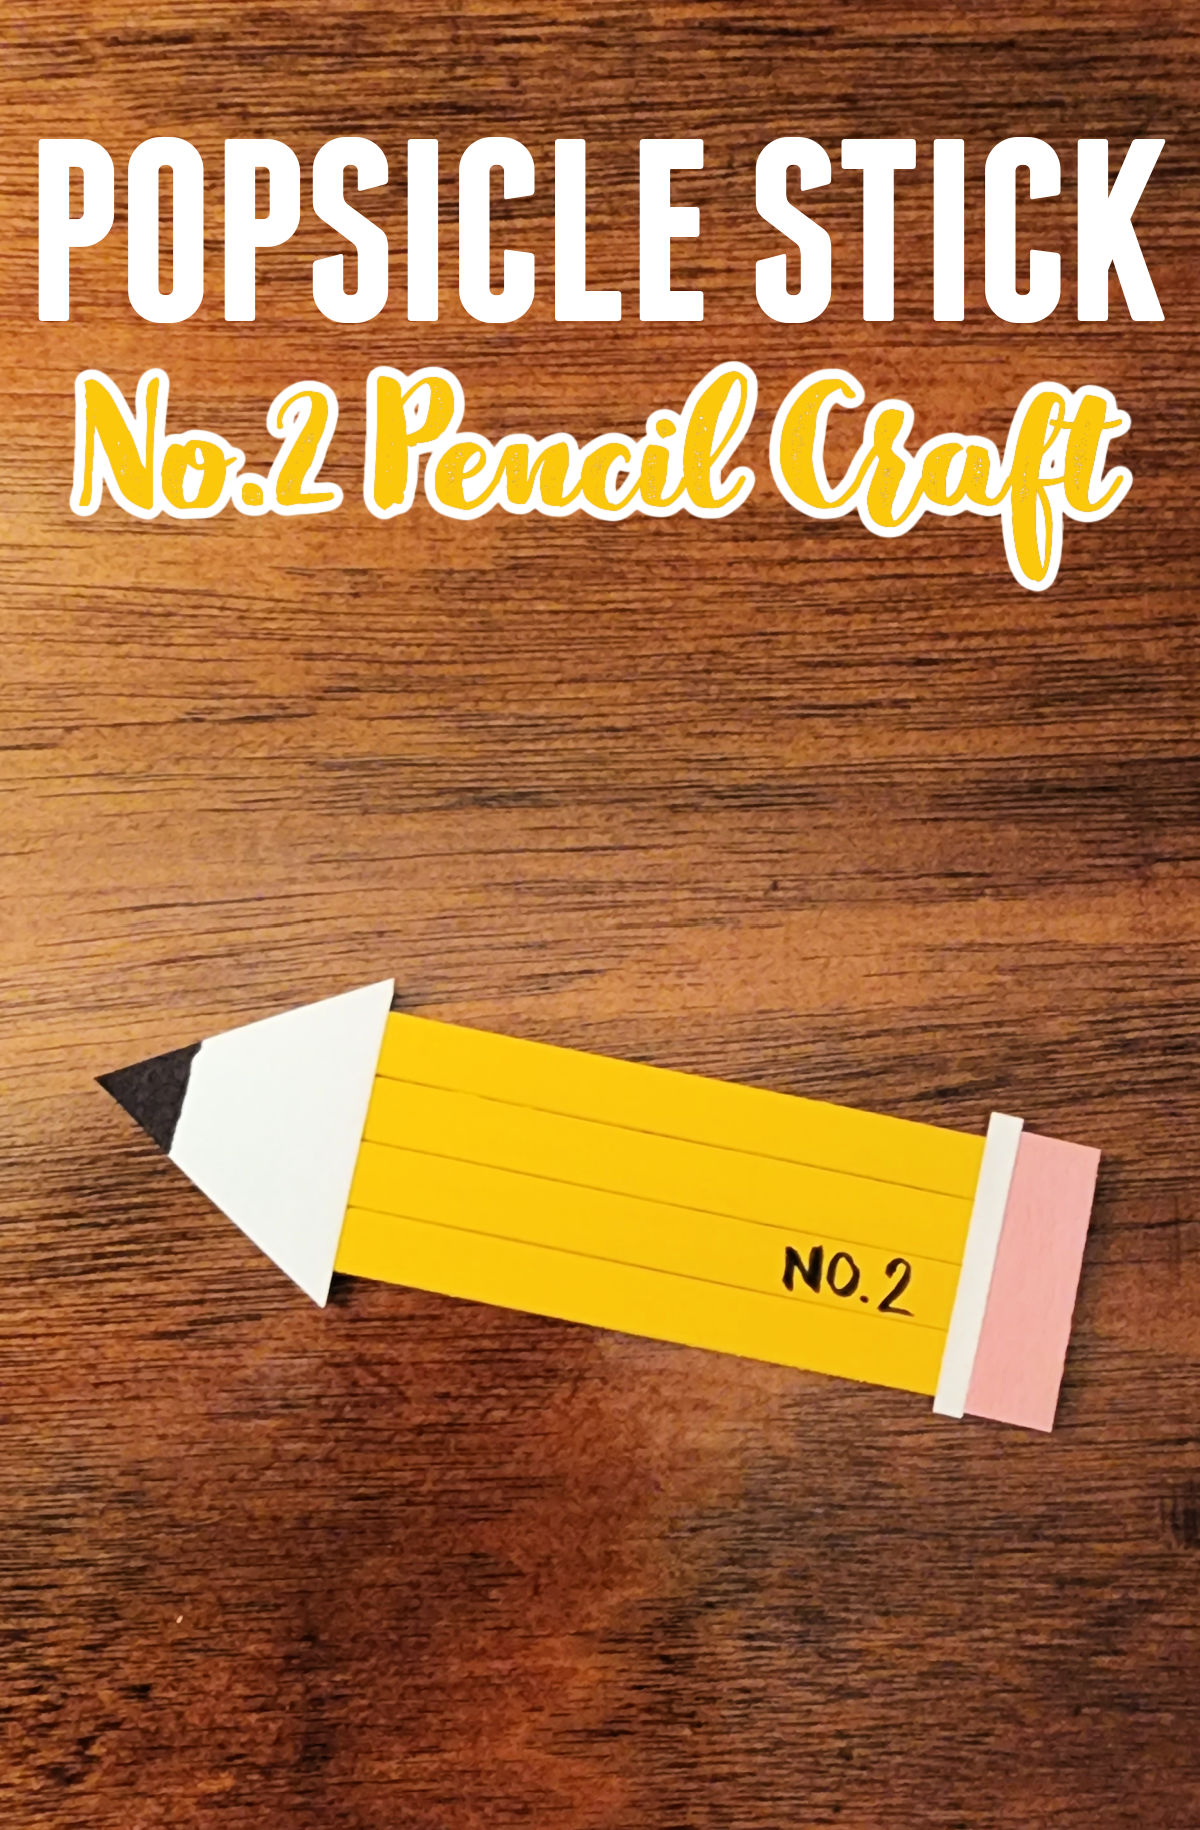 Popsicle Stick Pencil Craft made with yellow popsicle sticks and construction paper.